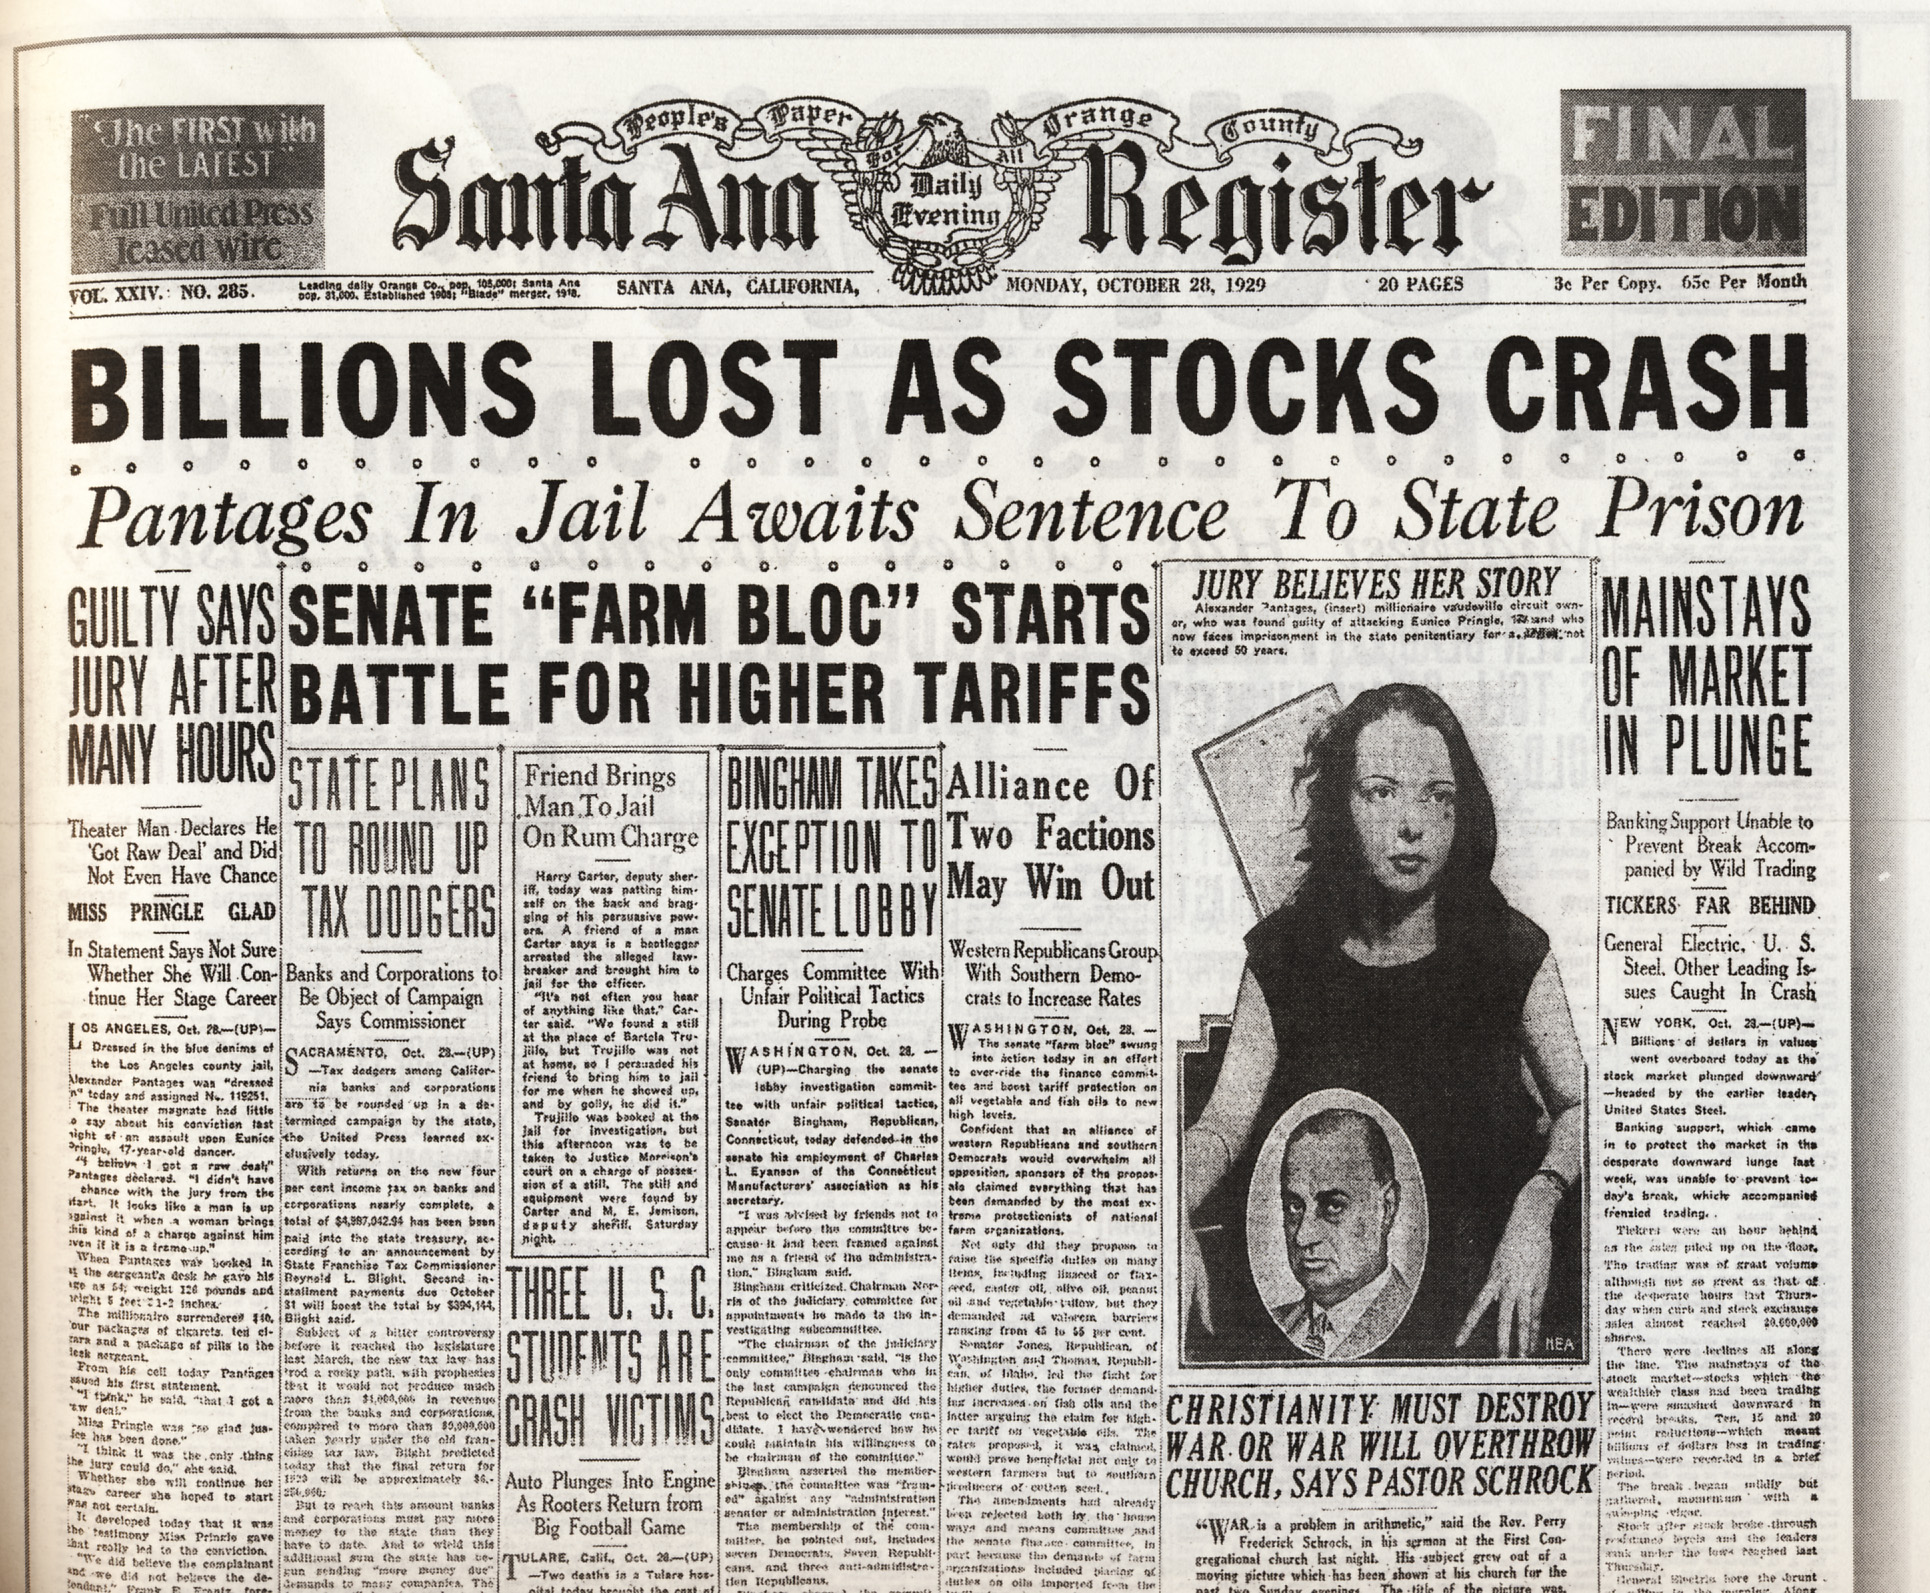 stock market browser 1920s